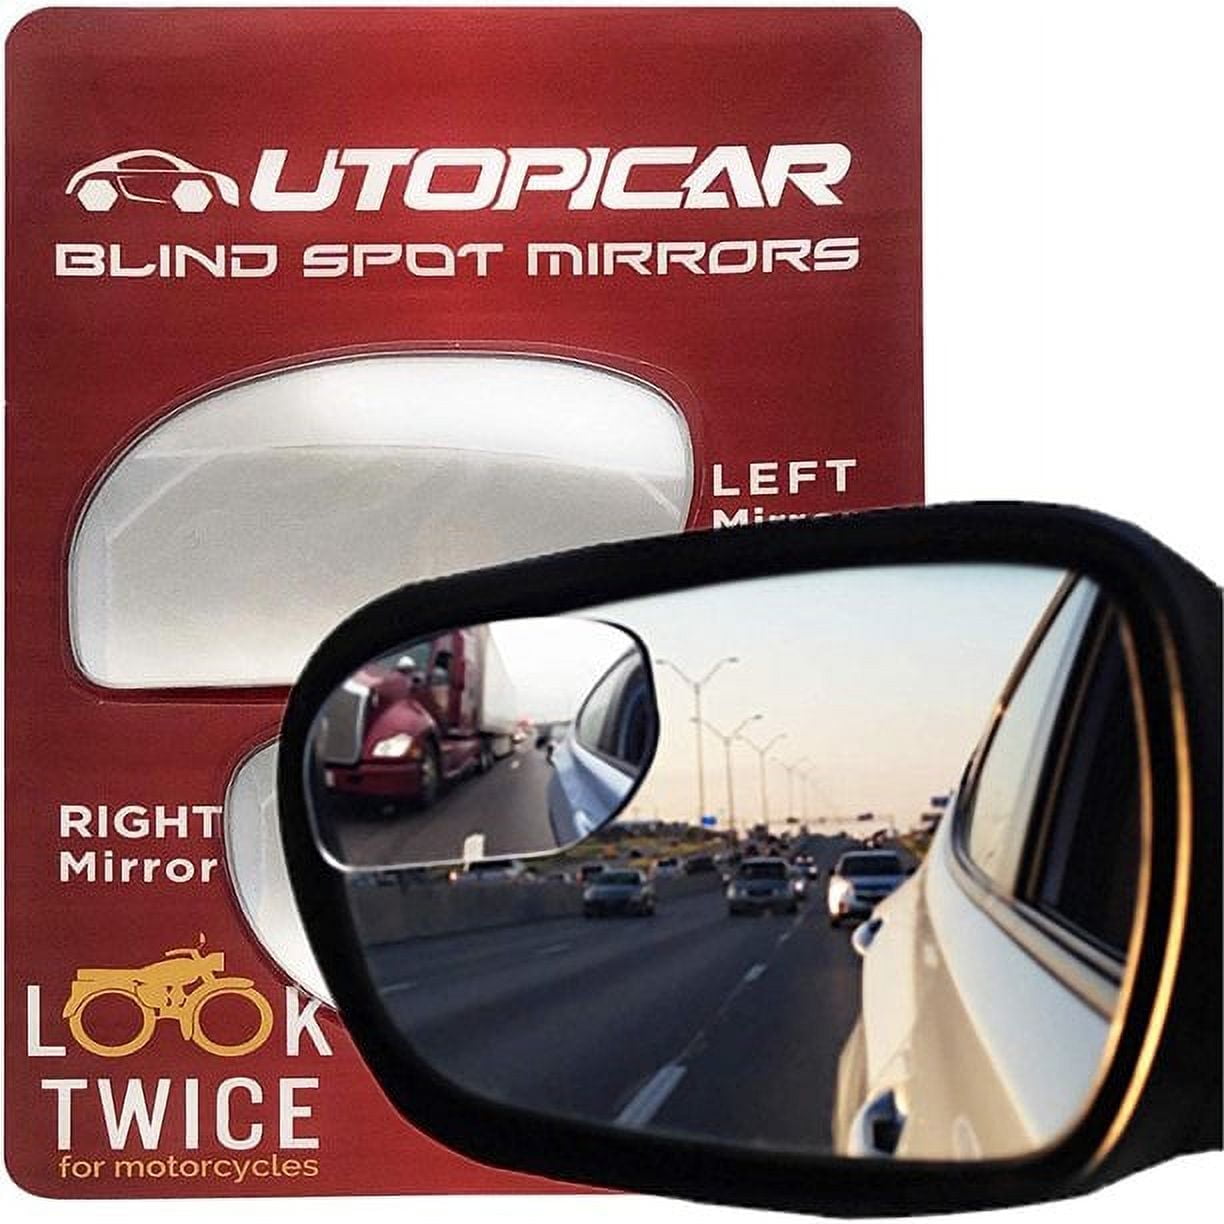 Utopicar Blind Spot Mirrors.Unique Design Car Door Mirrors/Mirror for Blind  Side Engineered for Larger Image and Traffic Safety. Awesome View!  Frameless Design (2 Pack) 